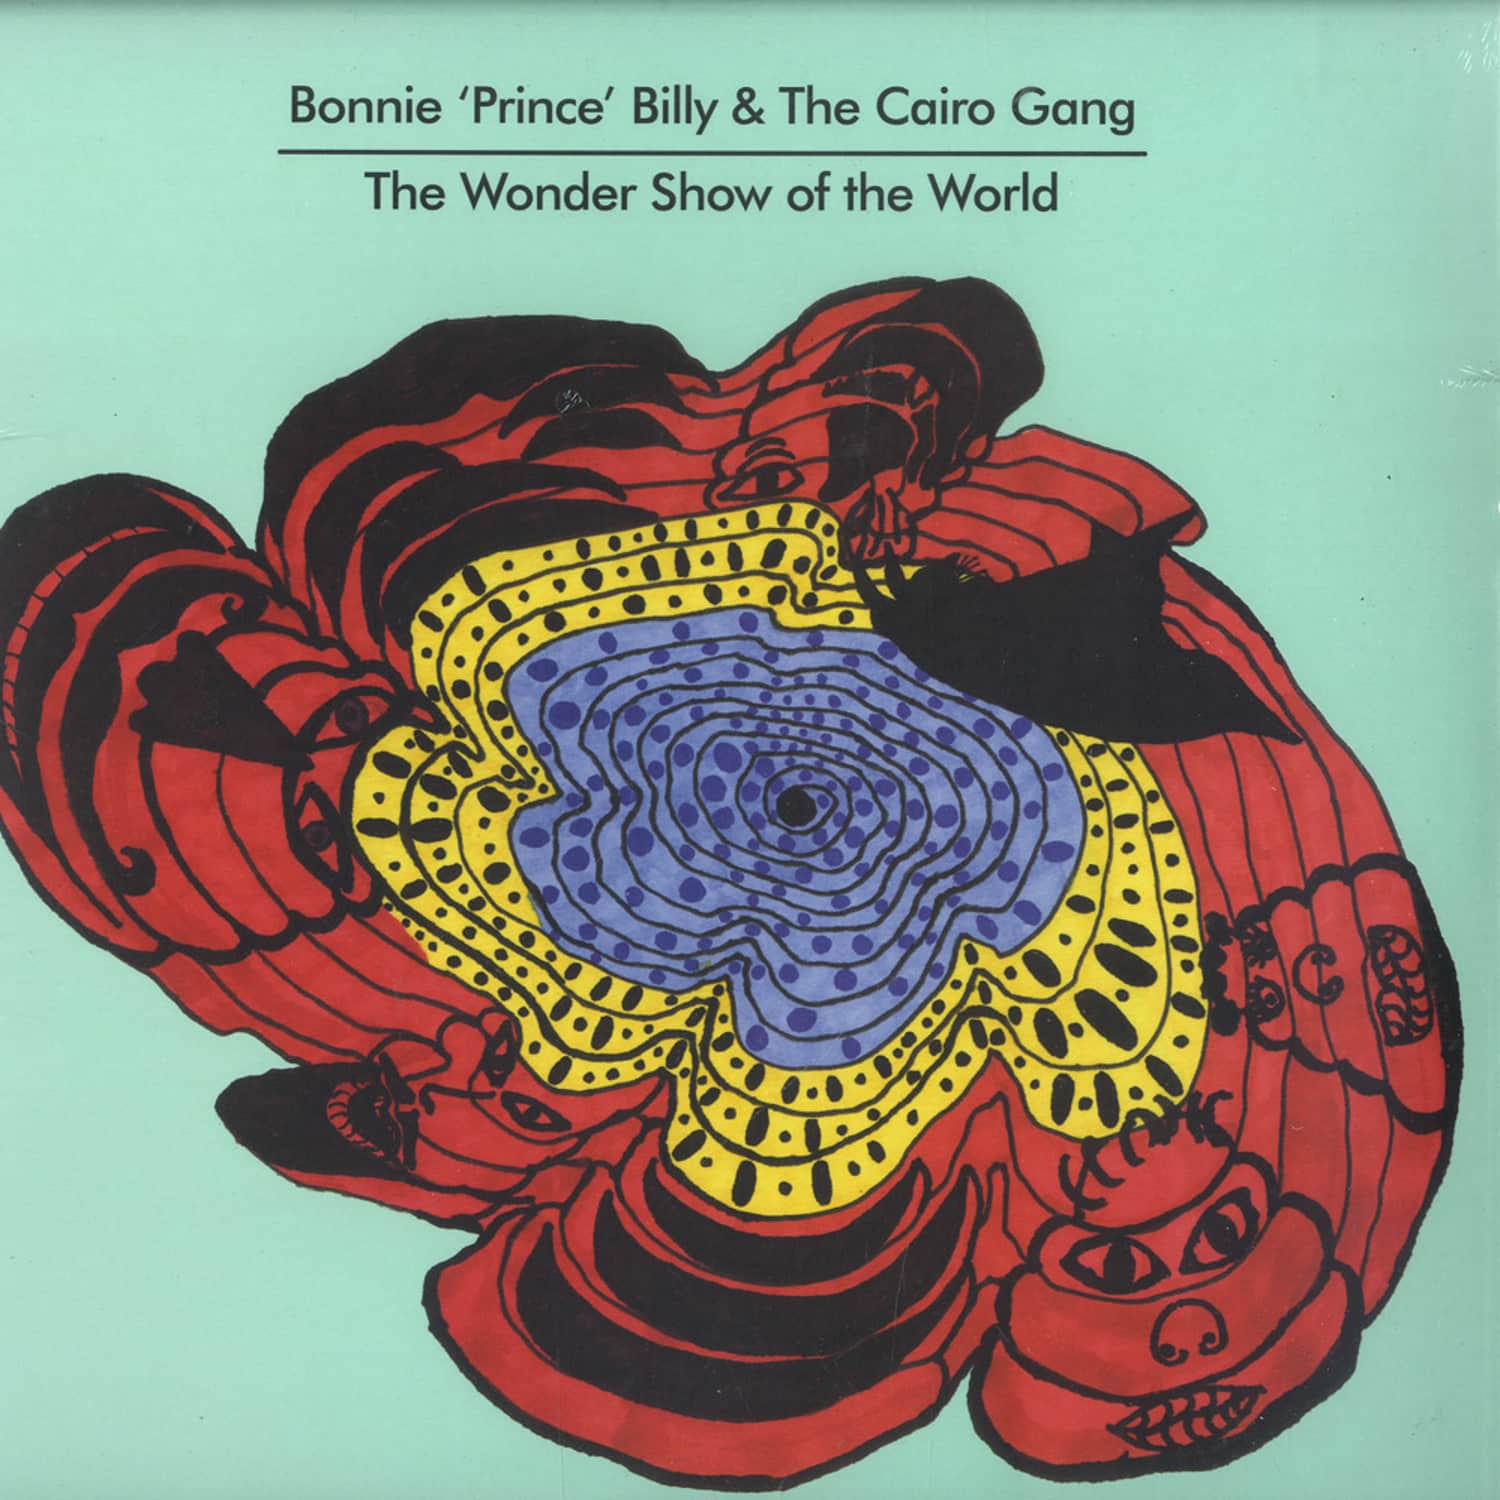 Bonnie Prince Billy & the Cairo Gang - THE WONDER SHOW OF THE WORLD 